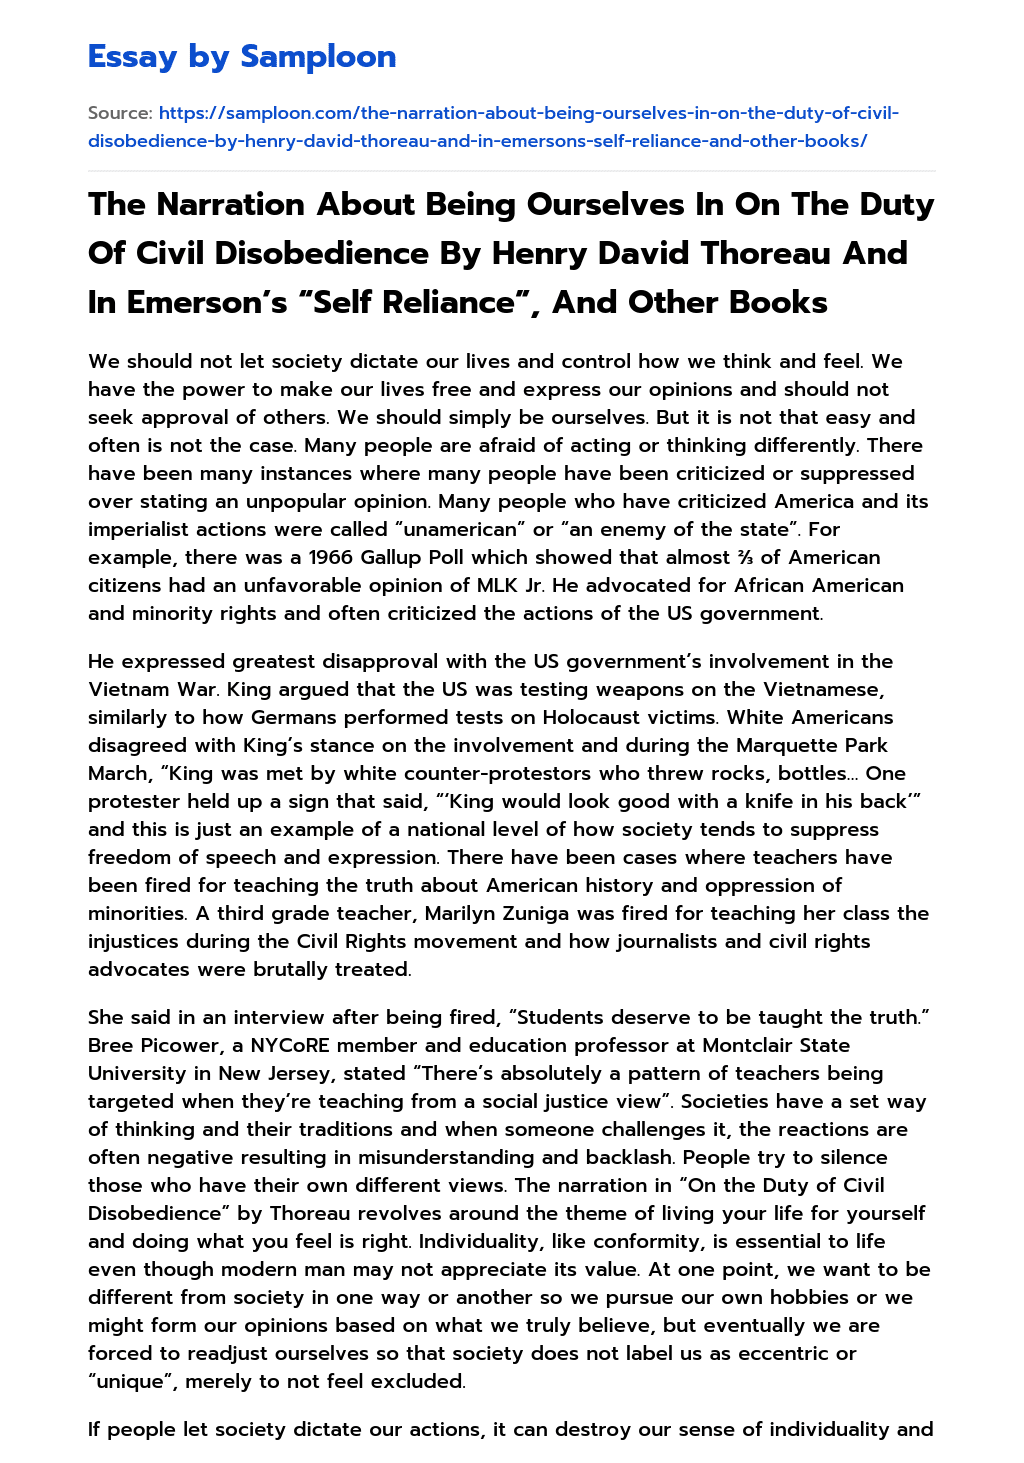 The Narration About Being Ourselves In On The Duty Of Civil Disobedience By Henry David Thoreau And In Emerson’s “Self Reliance”, And Other Books essay